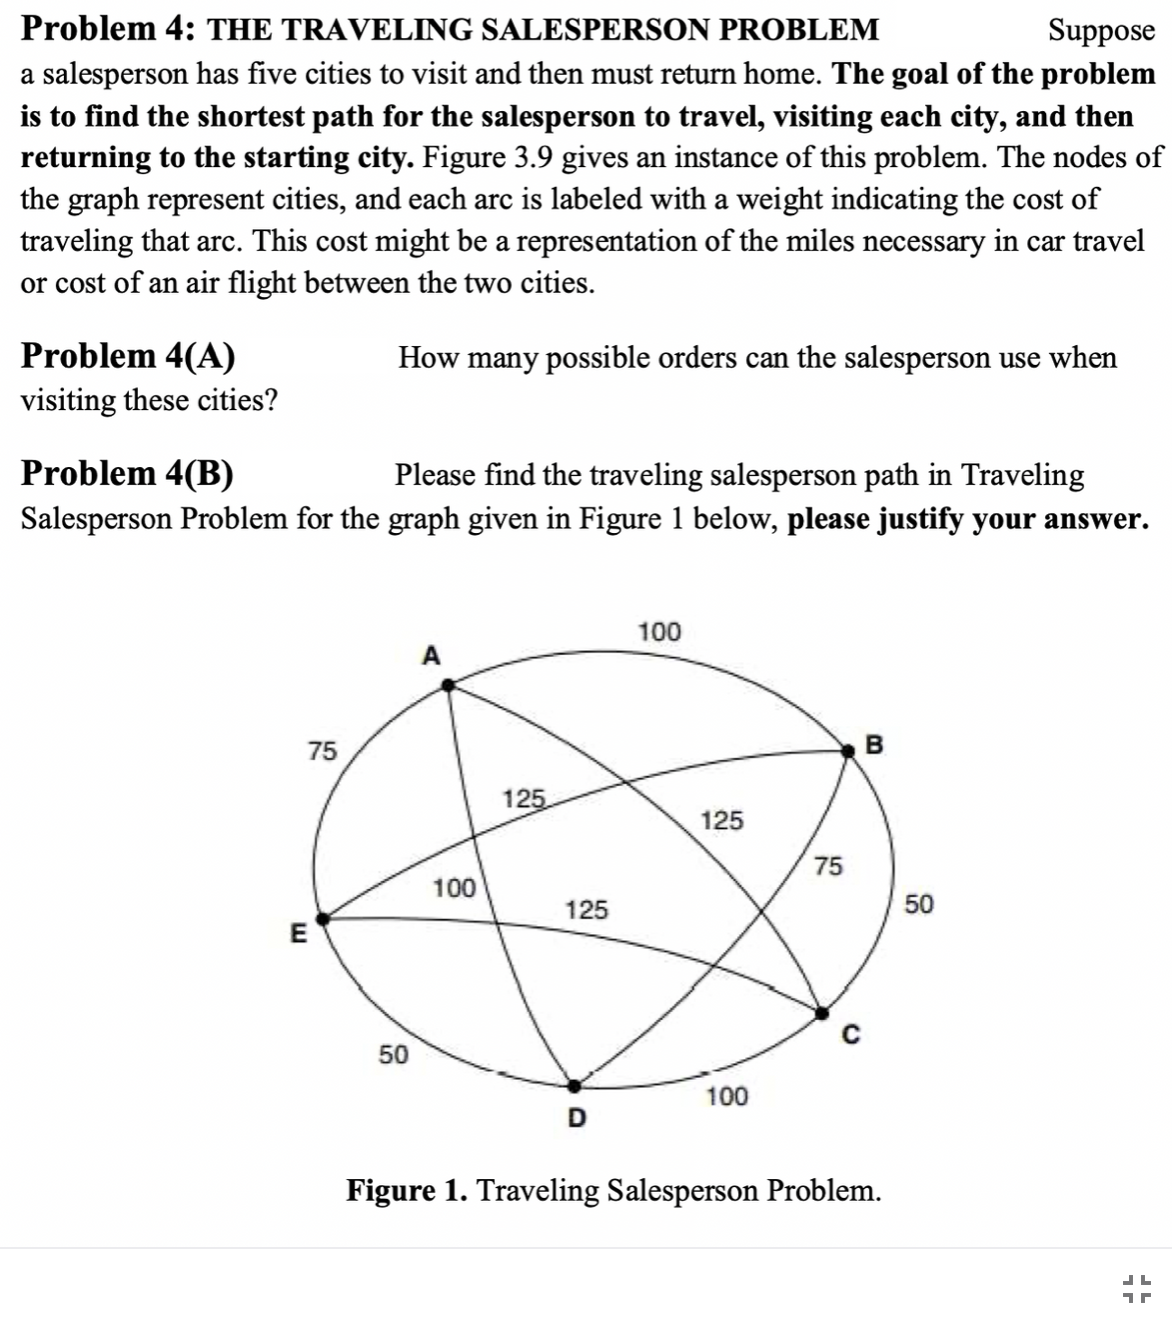 Problem 4: THE TRAVELING SALESPERSON PROBLEM
Suppose
a salesperson has five cities to visit and then must return home. The goal of the problem
is to find the shortest path for the salesperson to travel, visiting each city, and then
returning to the starting city. Figure 3.9 gives an instance of this problem. The nodes of
the graph represent cities, and each arc is labeled with a weight indicating the cost of
traveling that arc. This cost might be a representation of the miles necessary in car travel
or cost of an air flight between the two cities.
Problem 4(A)
visiting these cities?
How many possible orders can the salesperson use when
Problem 4(B)
Please find the traveling salesperson path in Traveling
Salesperson Problem for the graph given in Figure 1 below, please justify your answer.
100
A
75
125
125
75
100
125
50
50
100
Figure 1. Traveling Salesperson Problem.
B.
